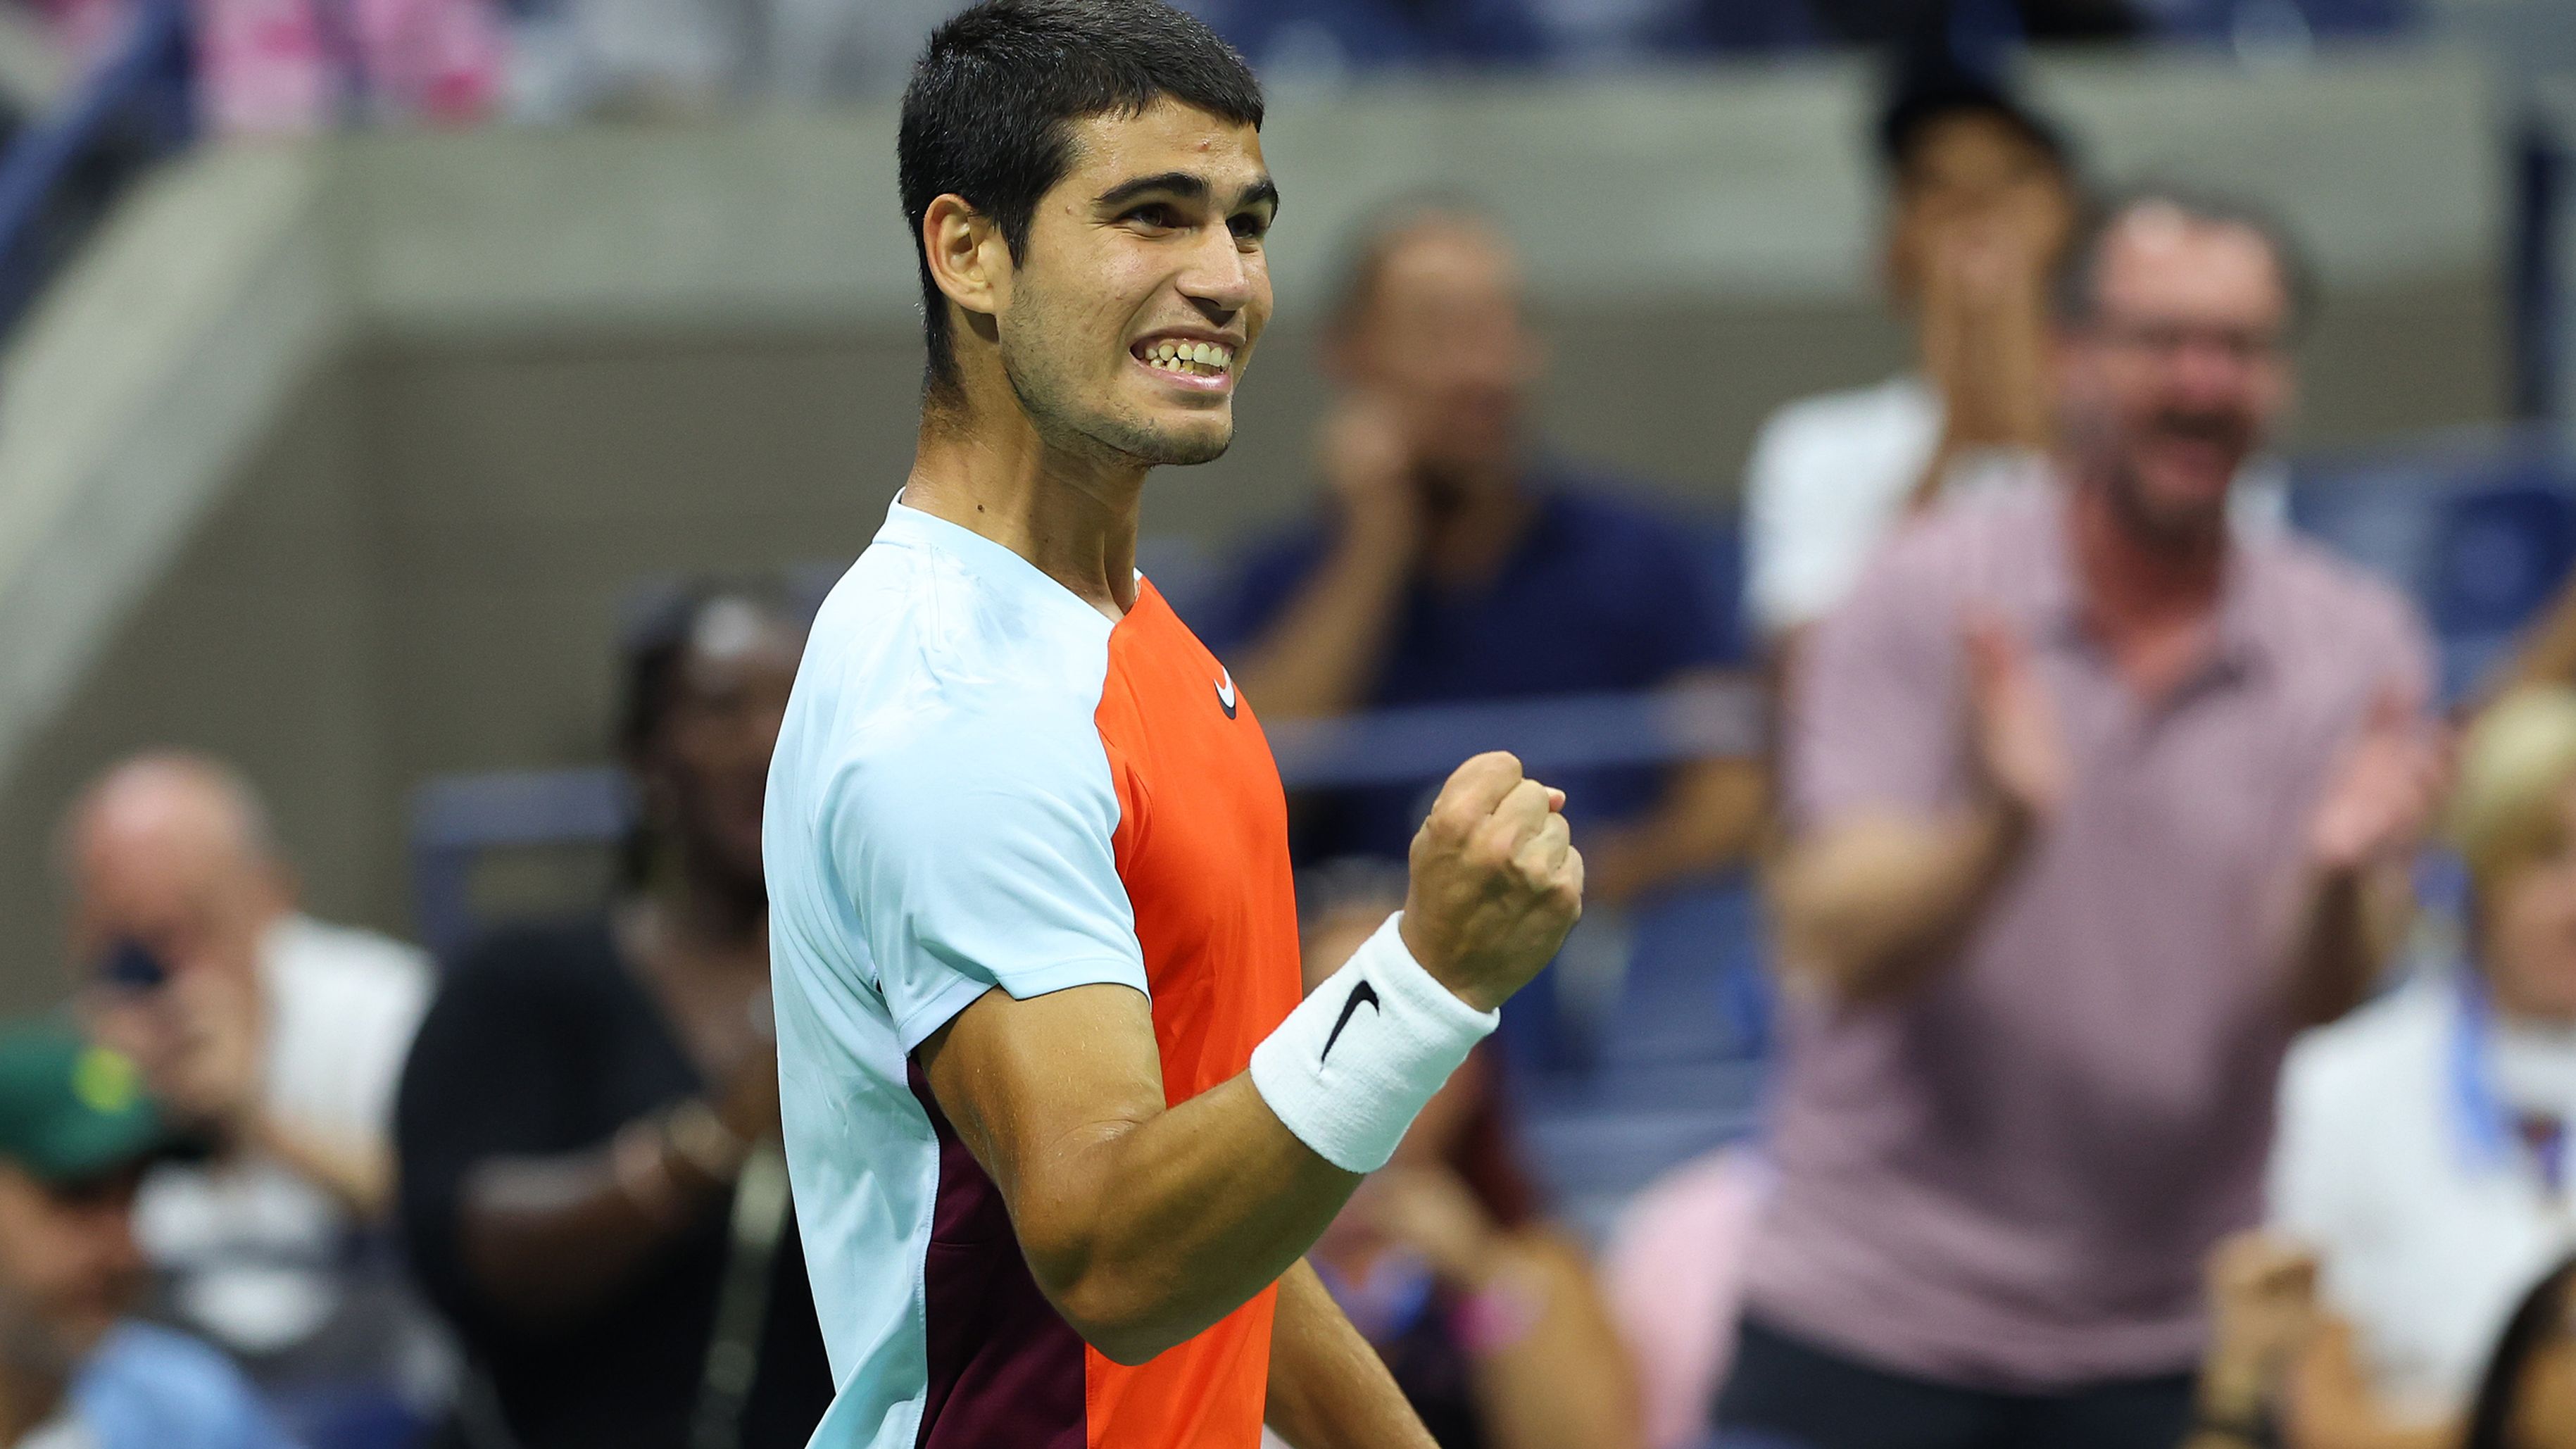 Spanish teenager Carlos Alcaraz makes 70-year history in stunning US Open achievement